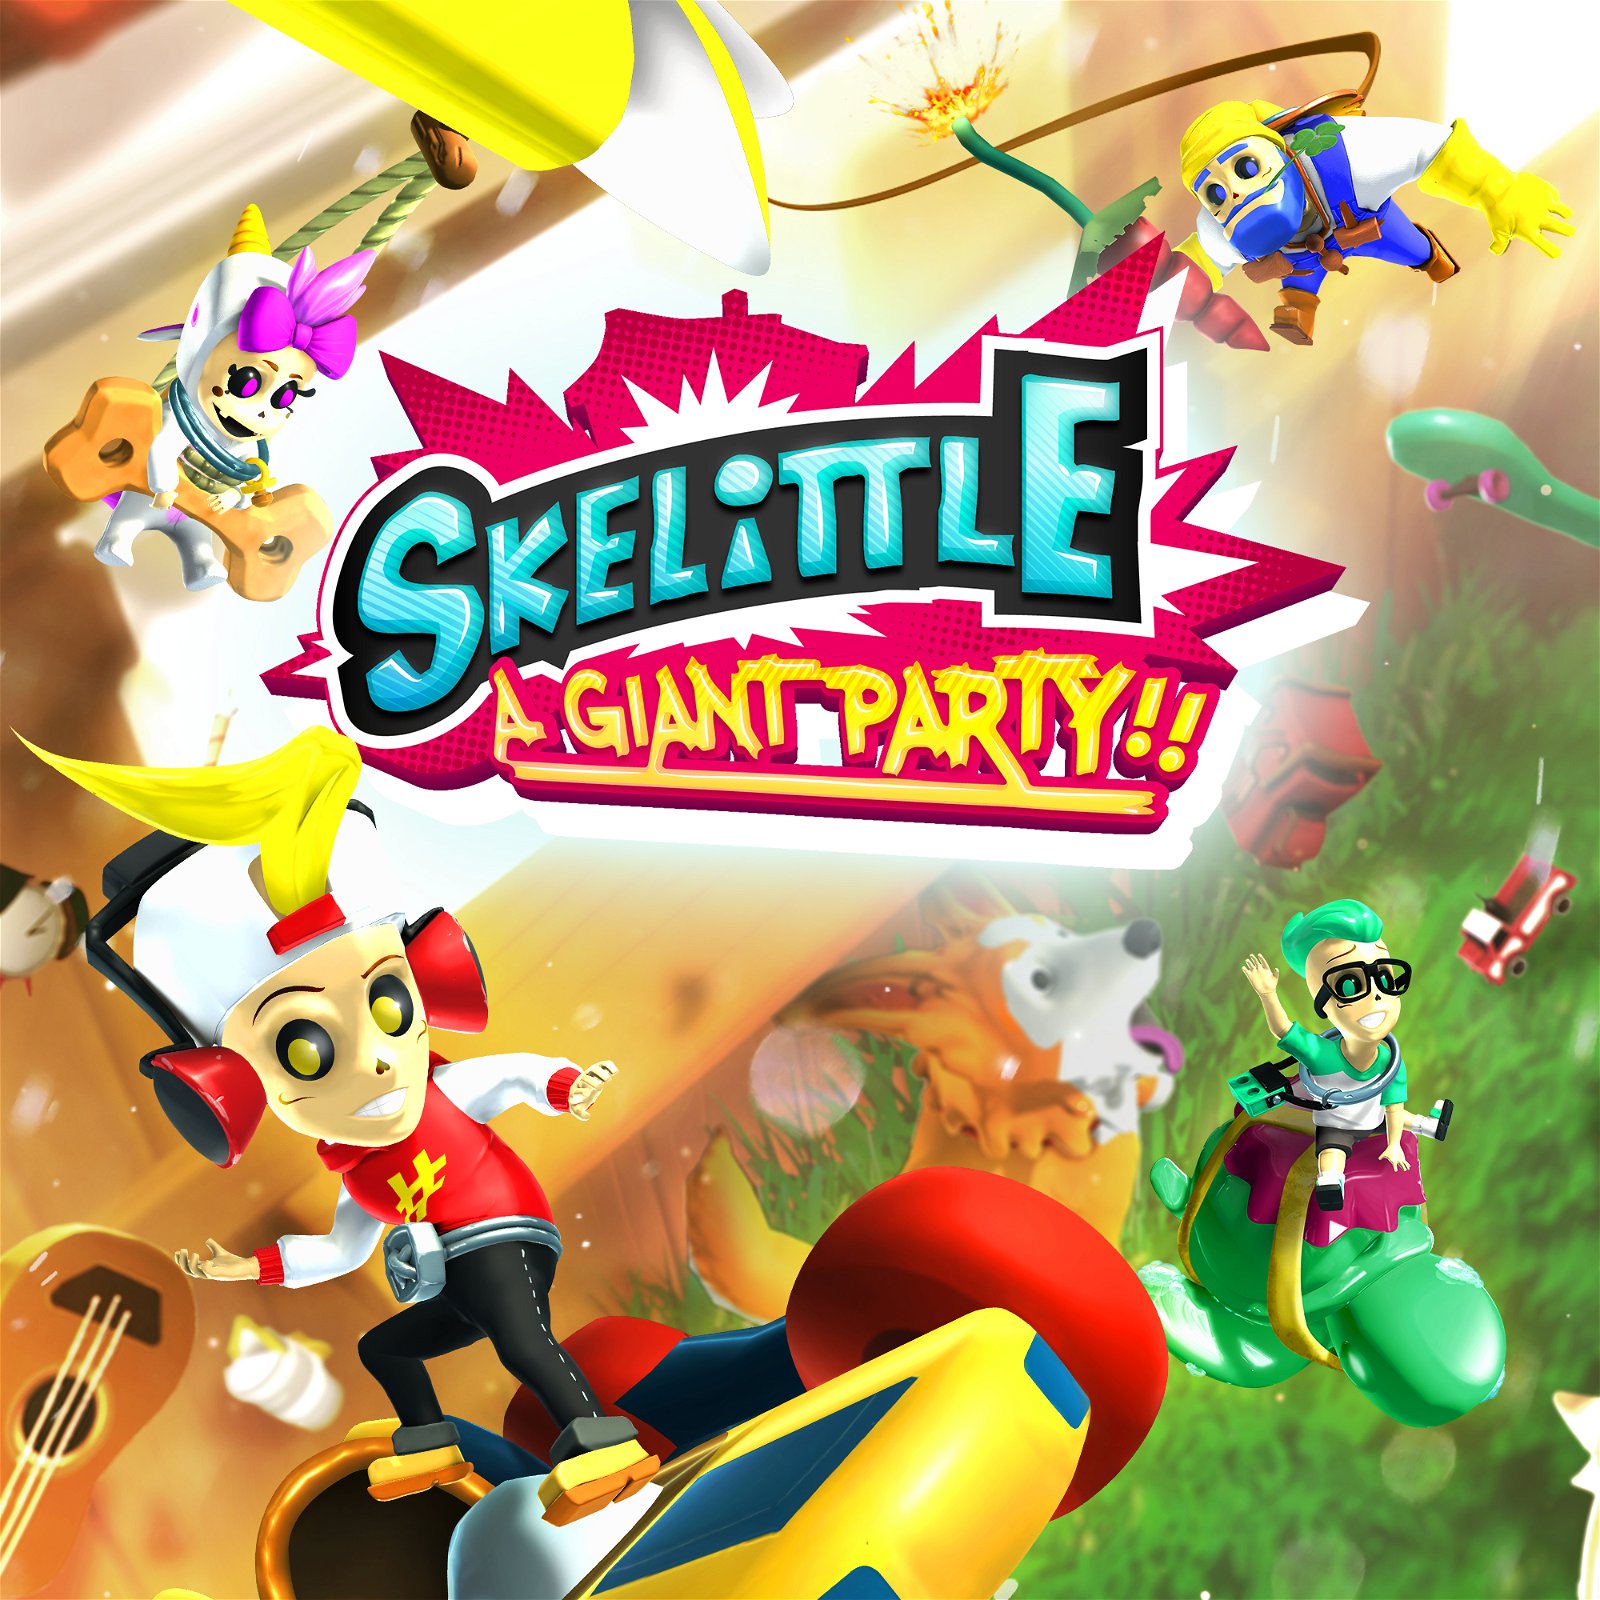 Image of Skelittle: A Giant Party !!